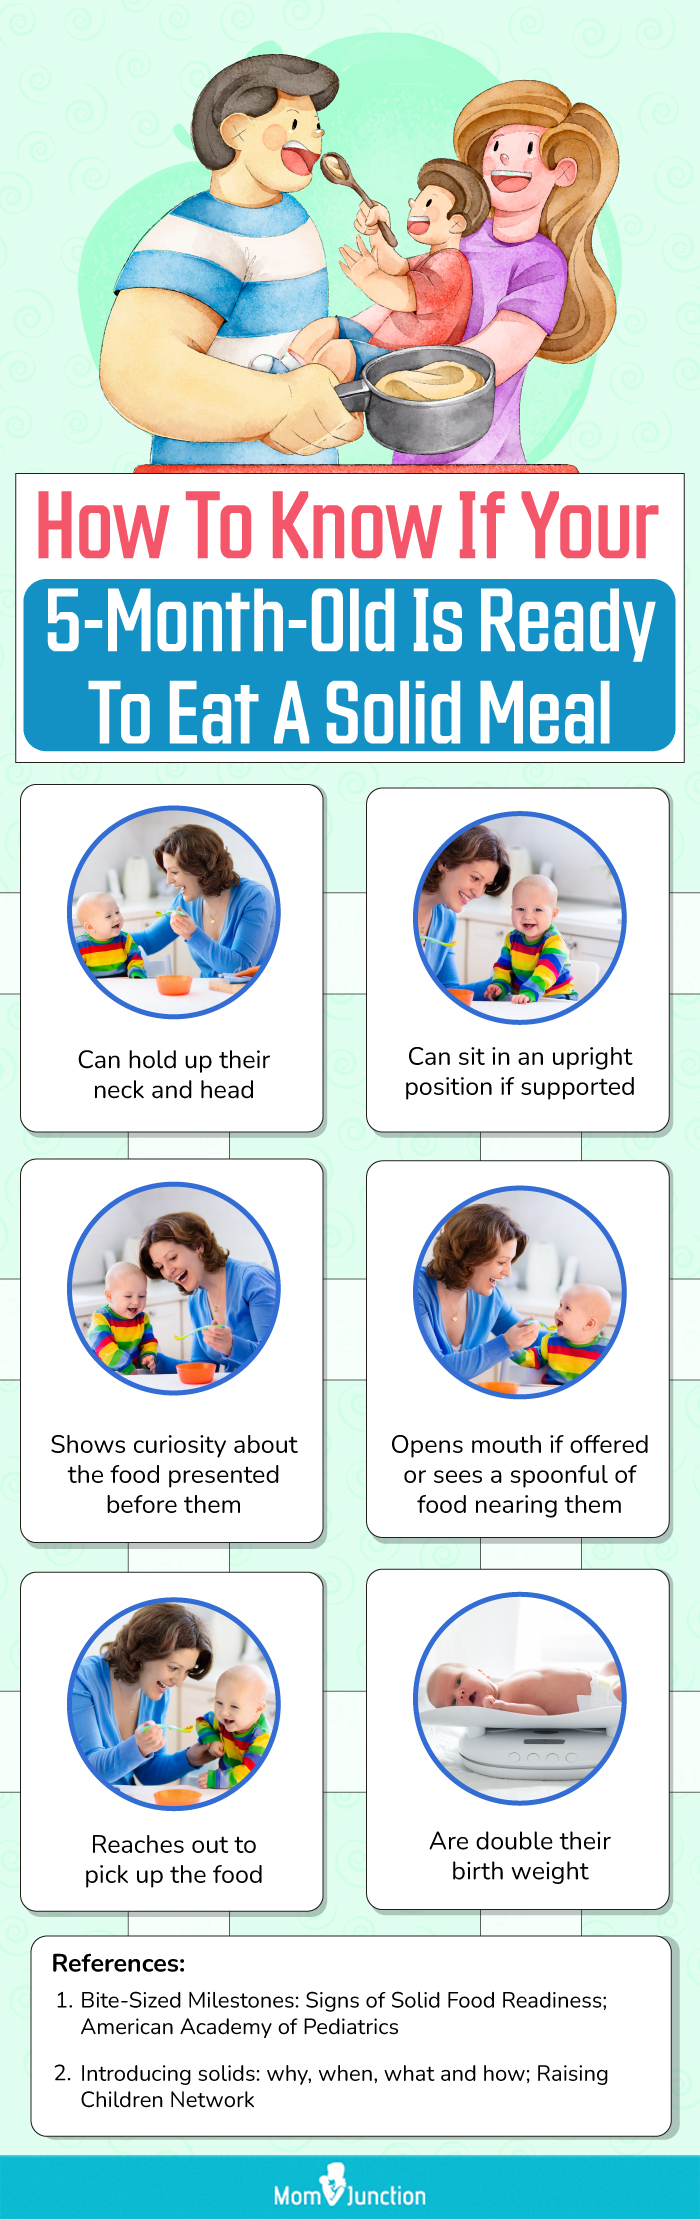 how to know if your 5 month old is ready to eat a solid meal (infographic)